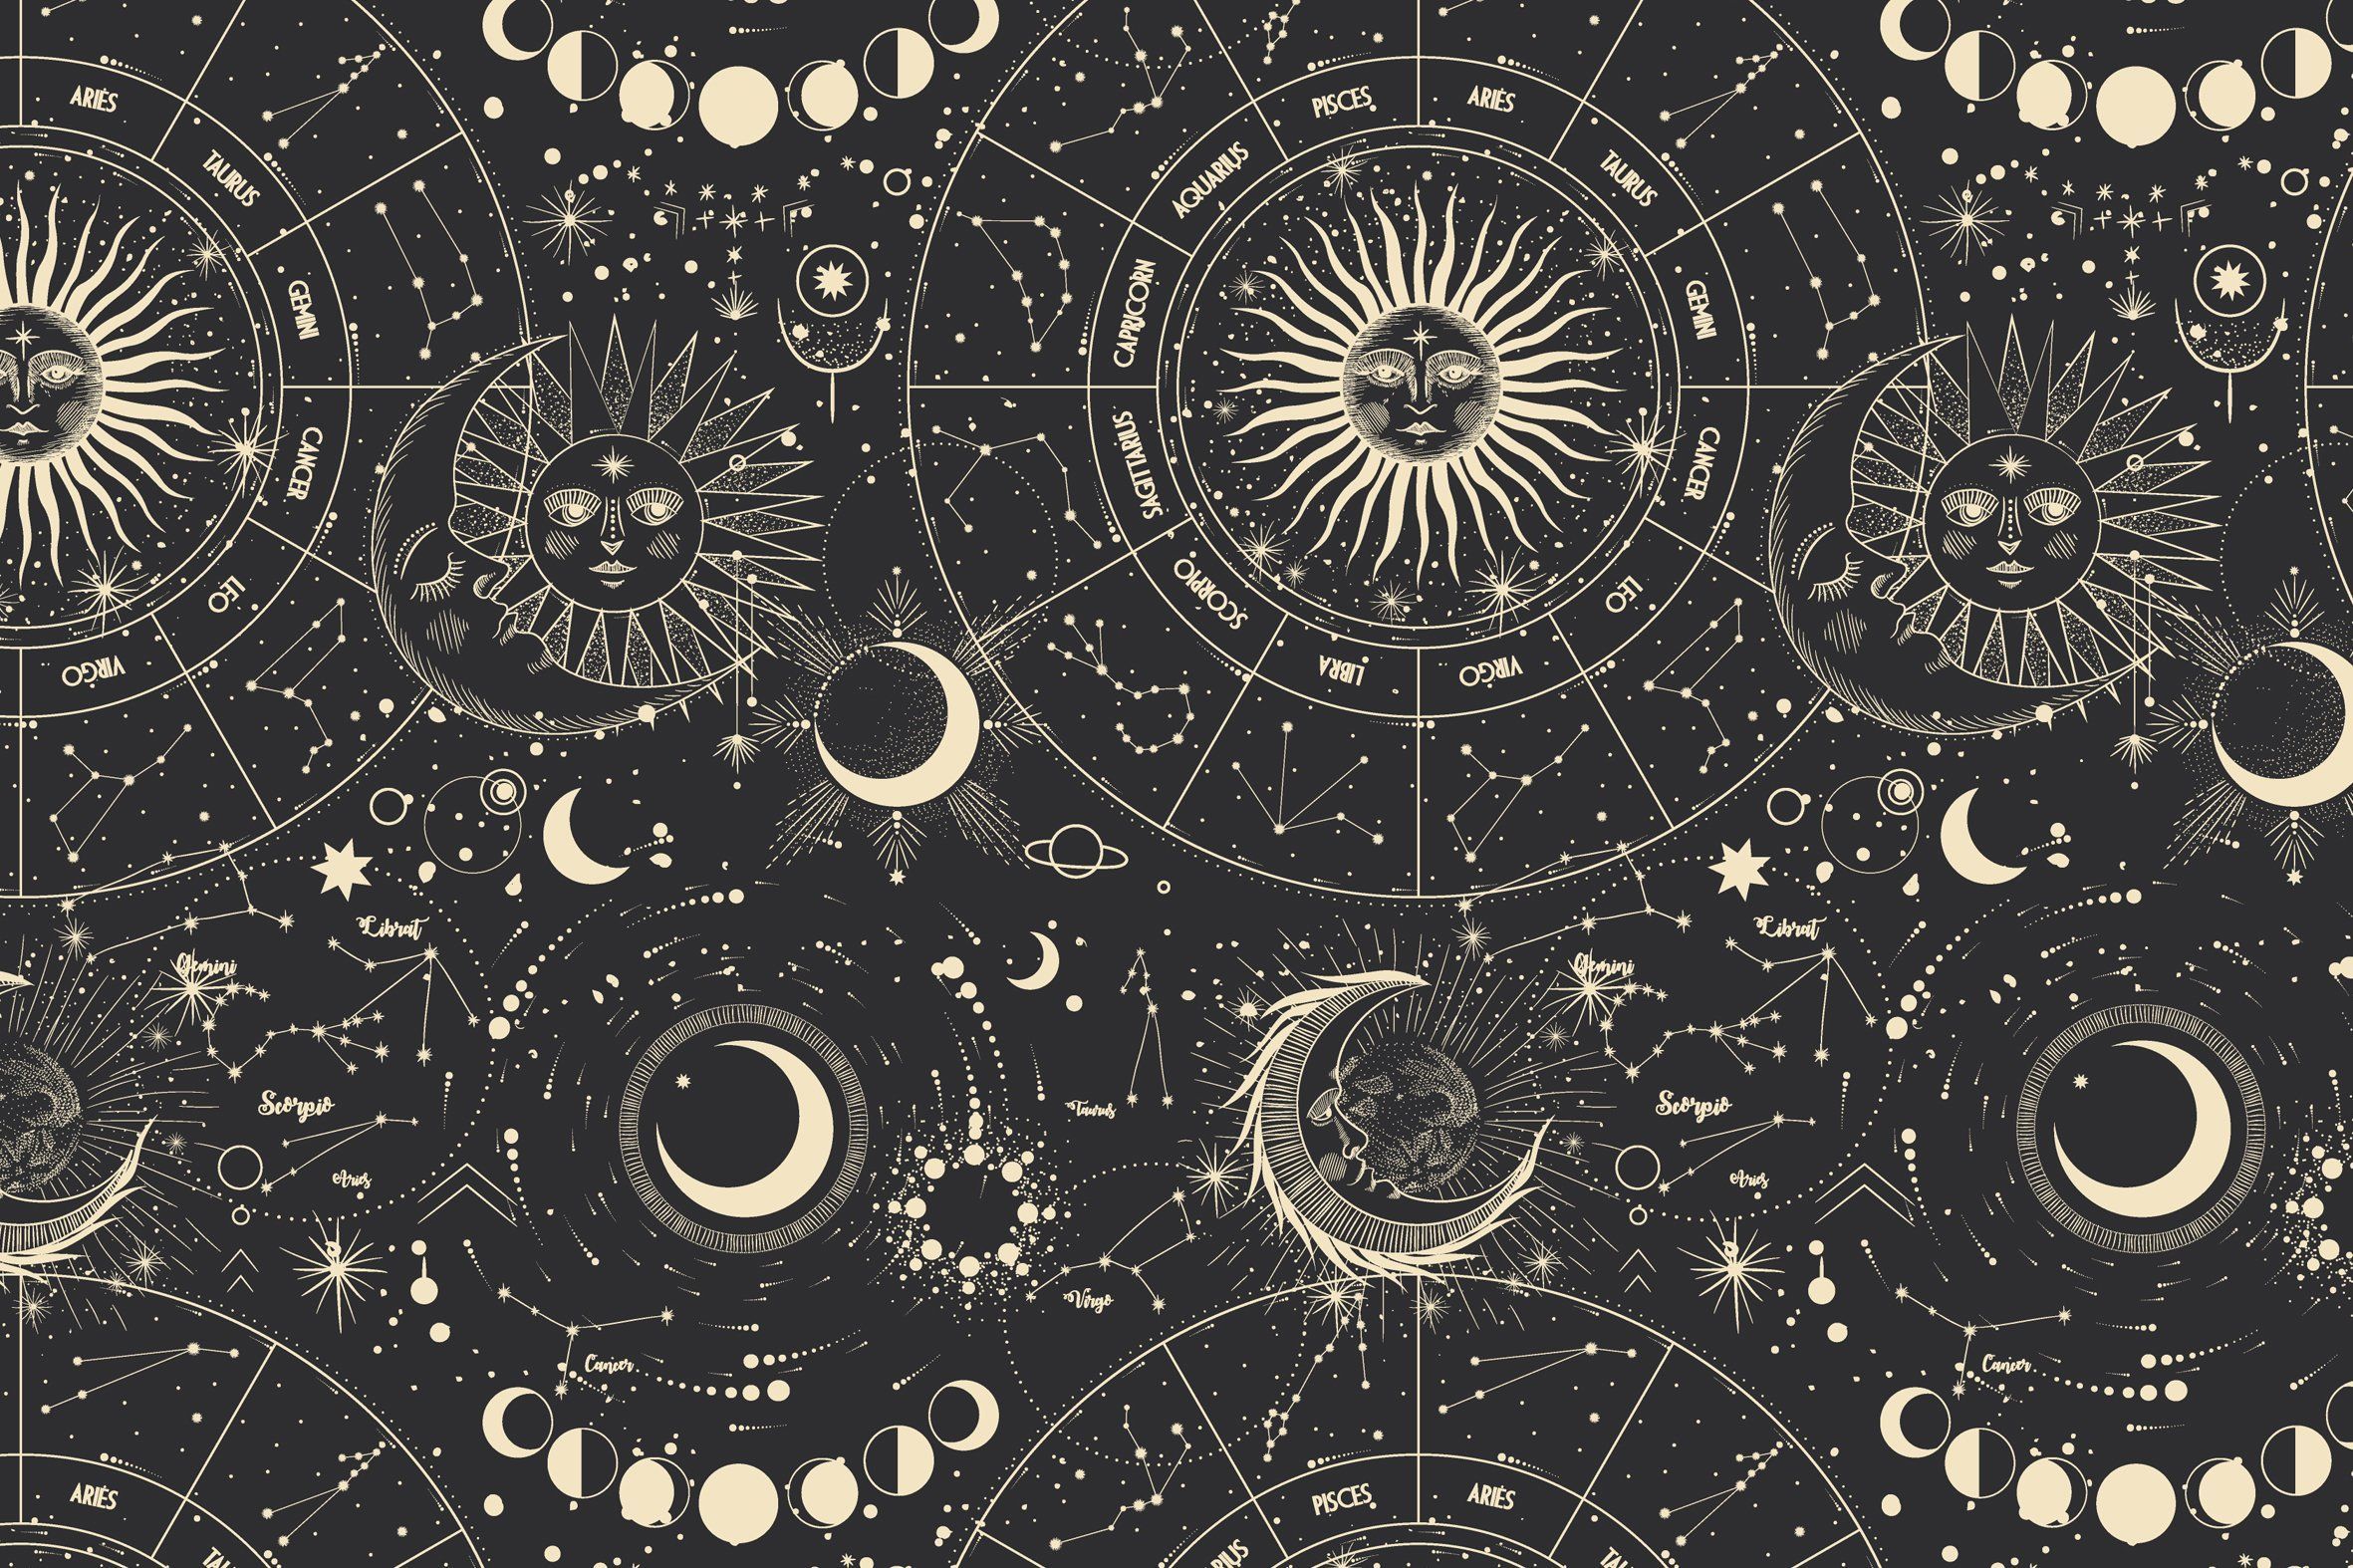 Witchy pattern by Polina on Dribbble